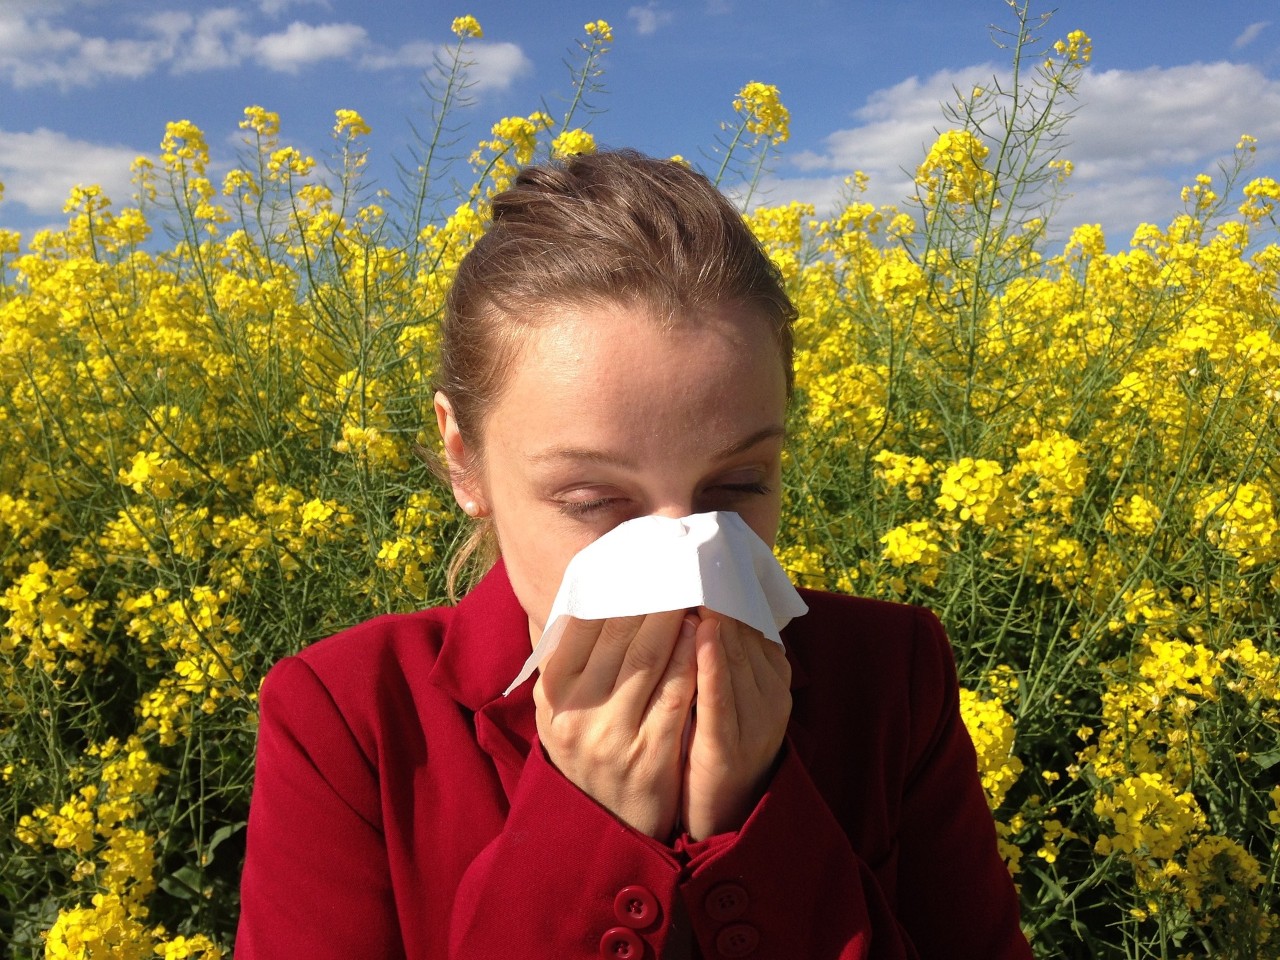 a photo of a woman sneezing into a facial tissue in a field of flowers